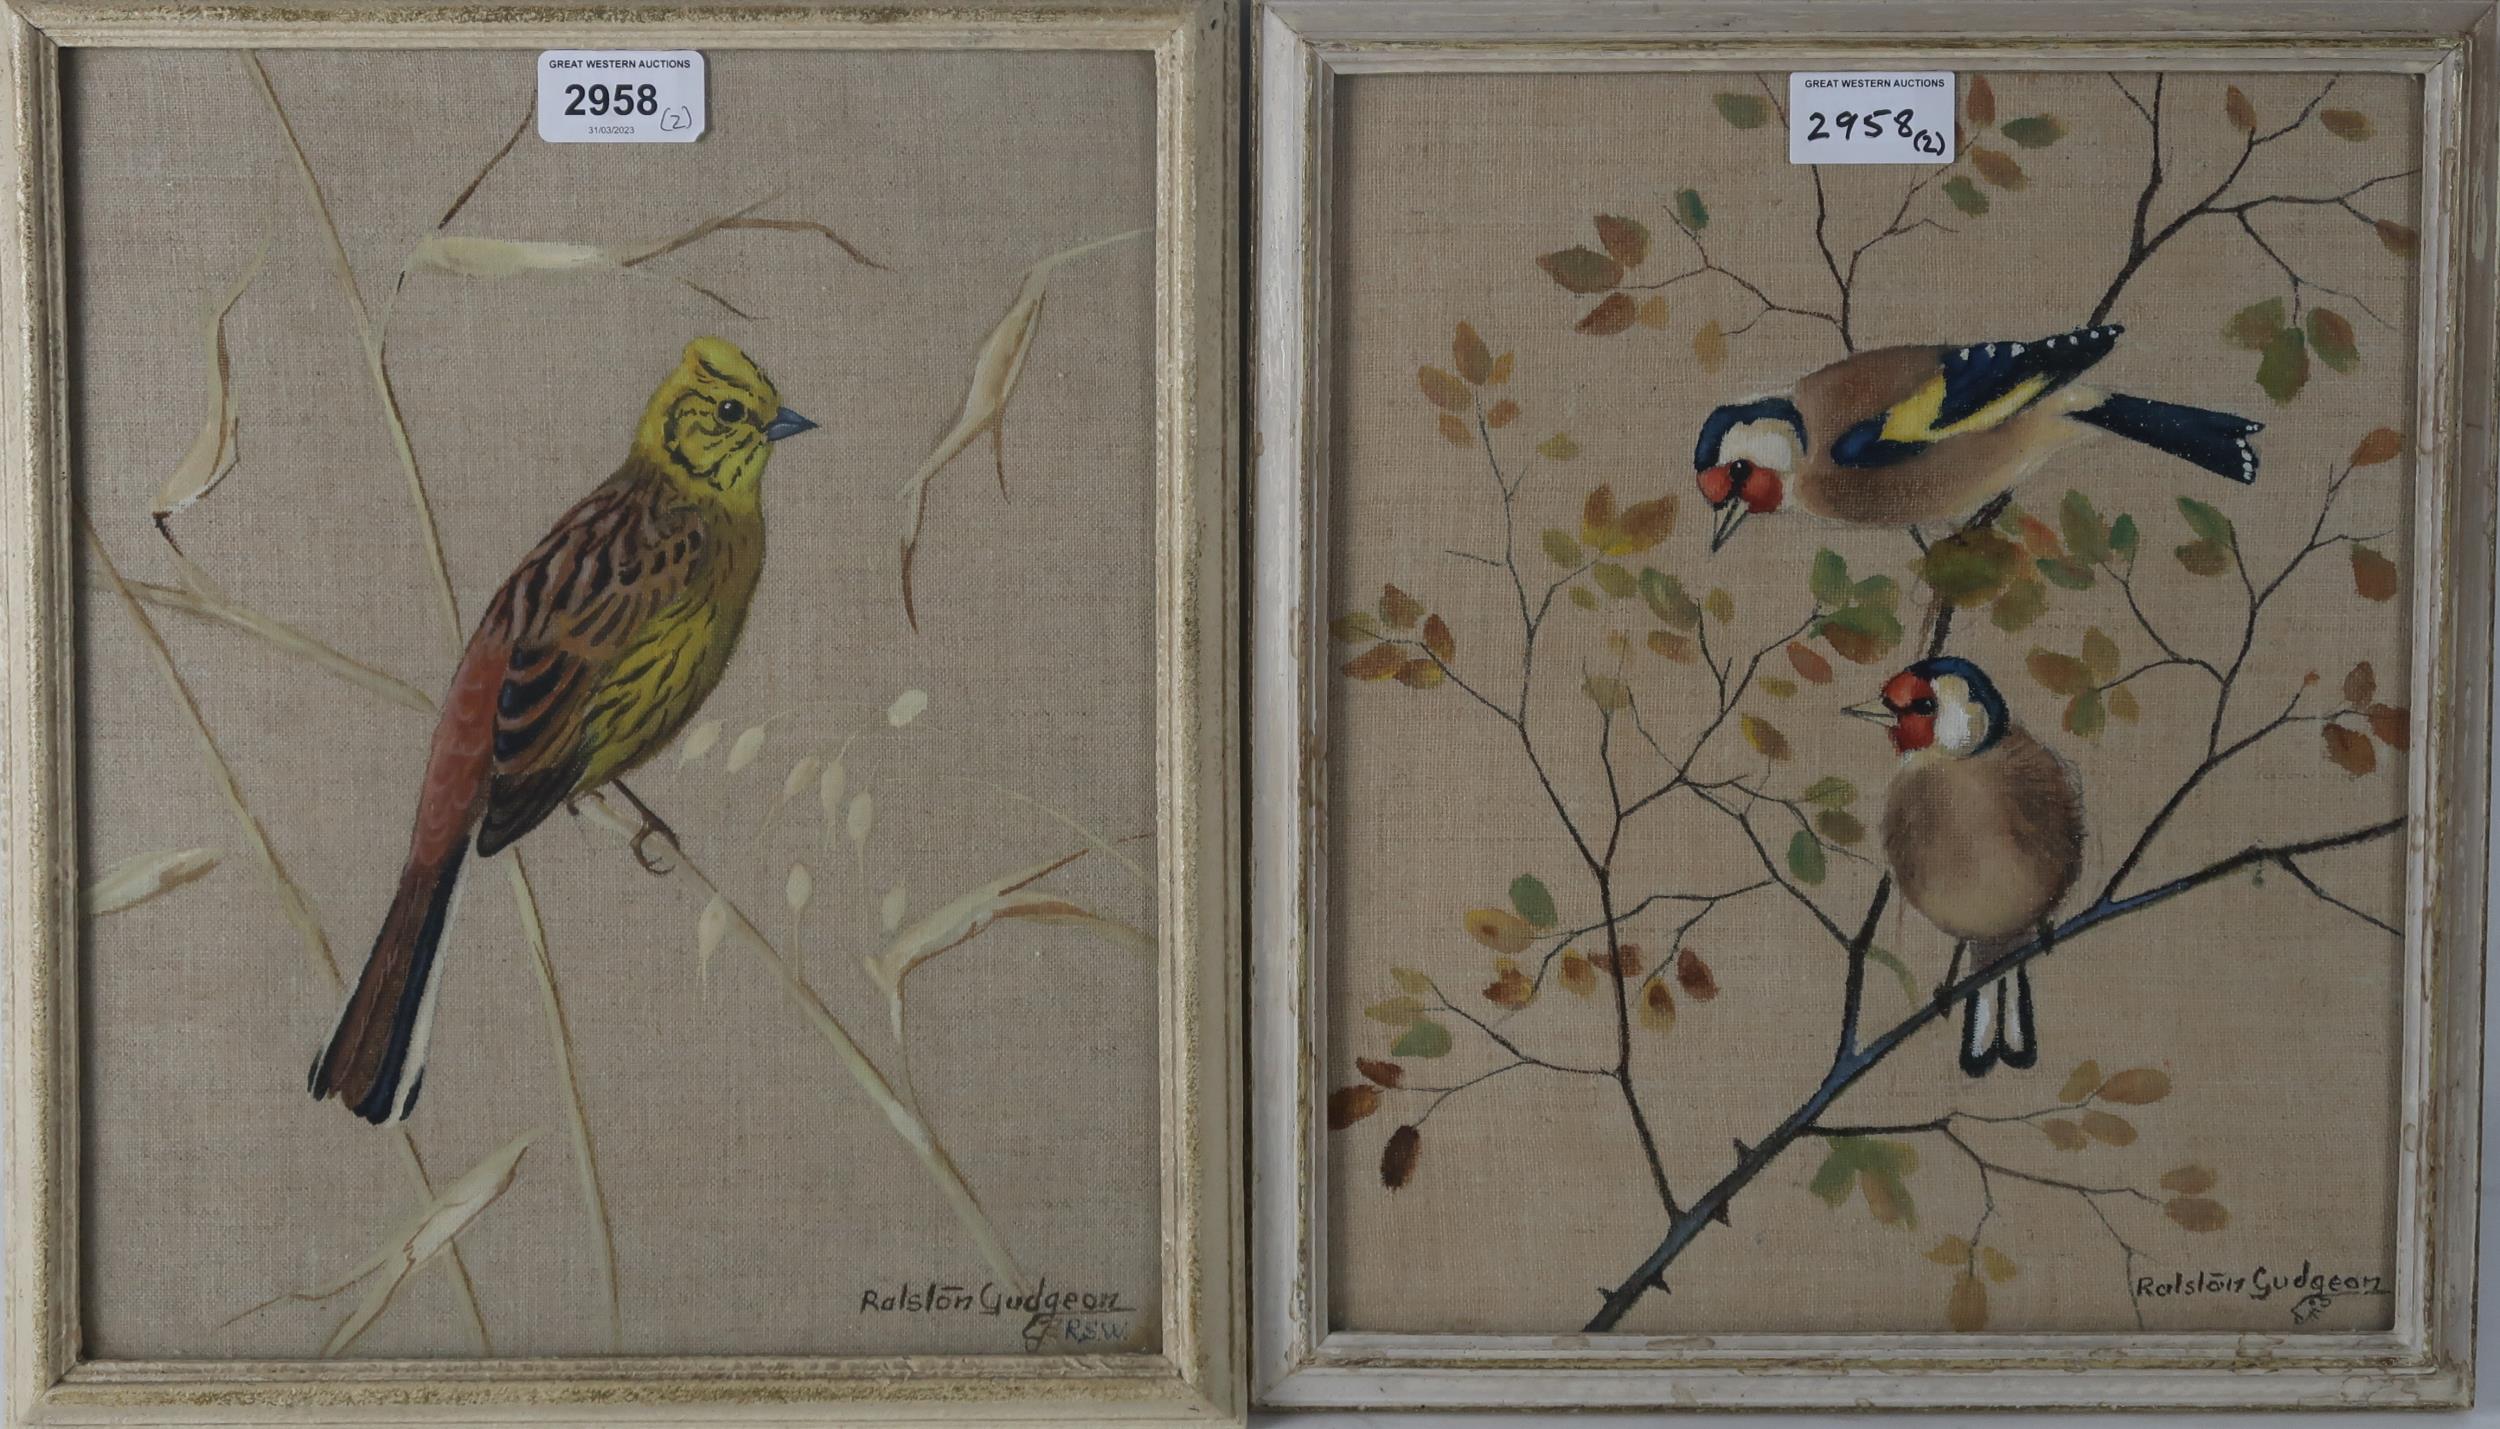 RALSTON GUDGEON (SCOTTISH 1910-1984) GOLDFINCHES Gouache on linen, signed lower right, 29.5 x